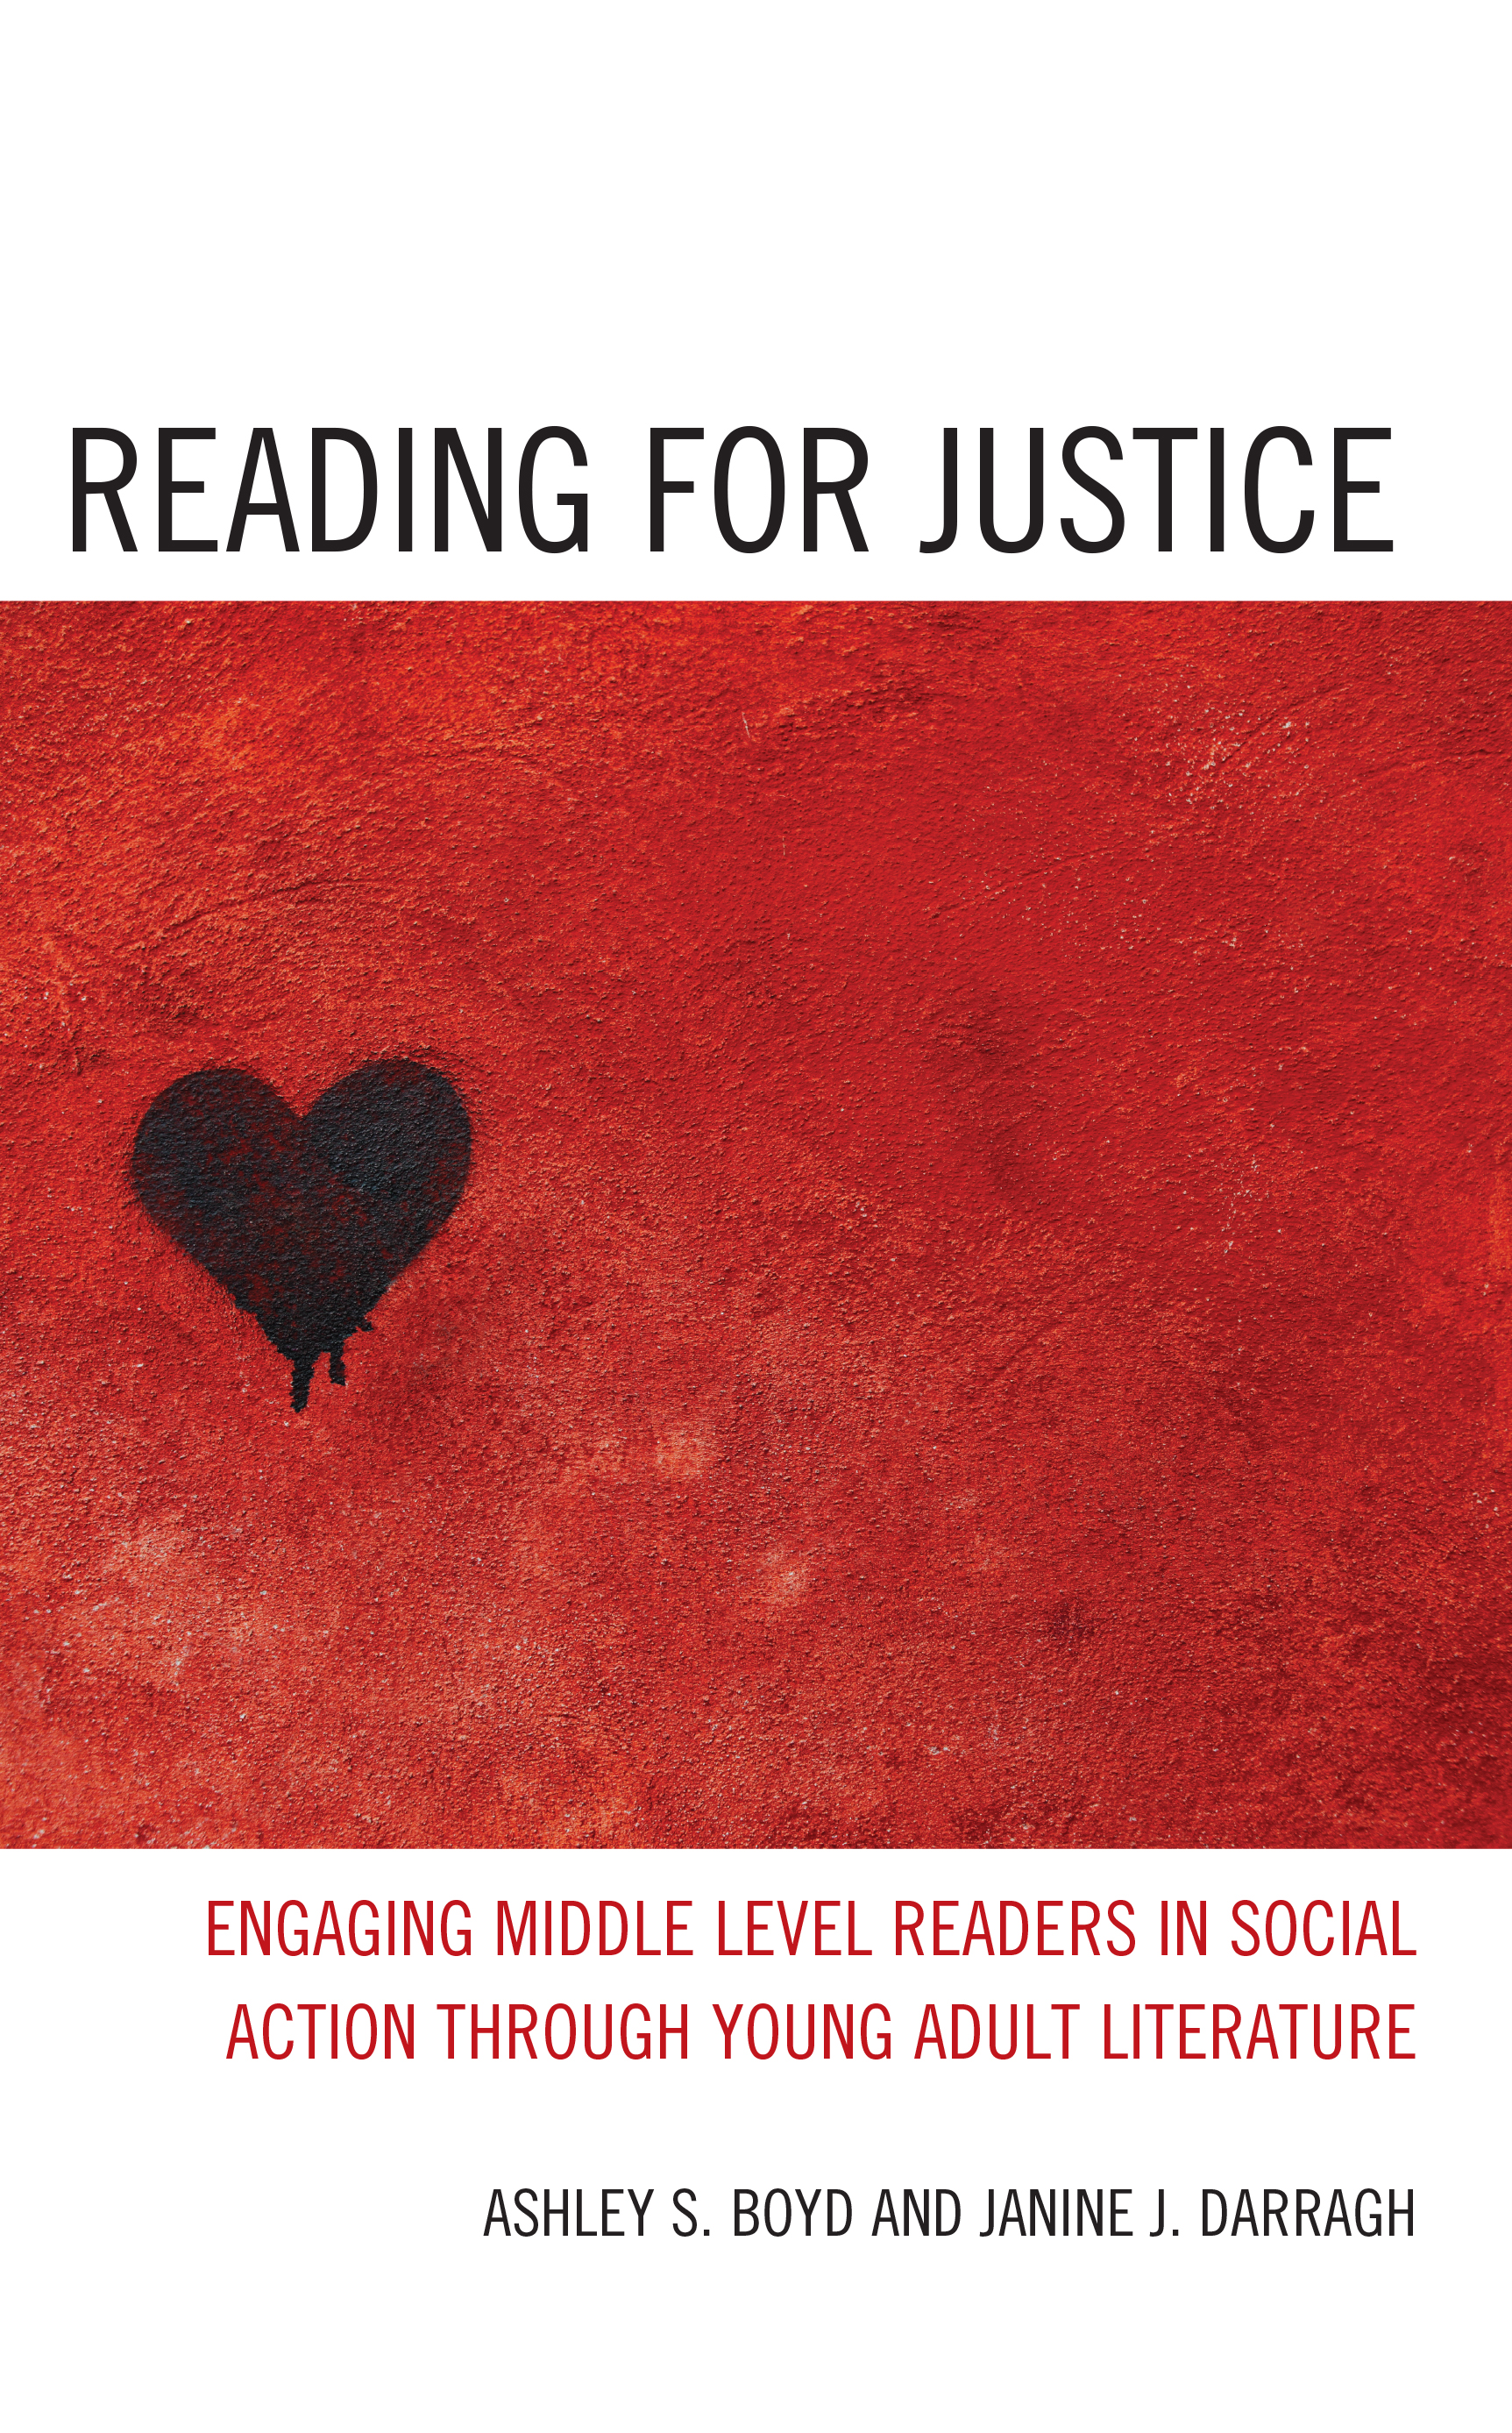 Reading for Justice: Engaging Middle Level Readers in Social Action through Young Adult Literature